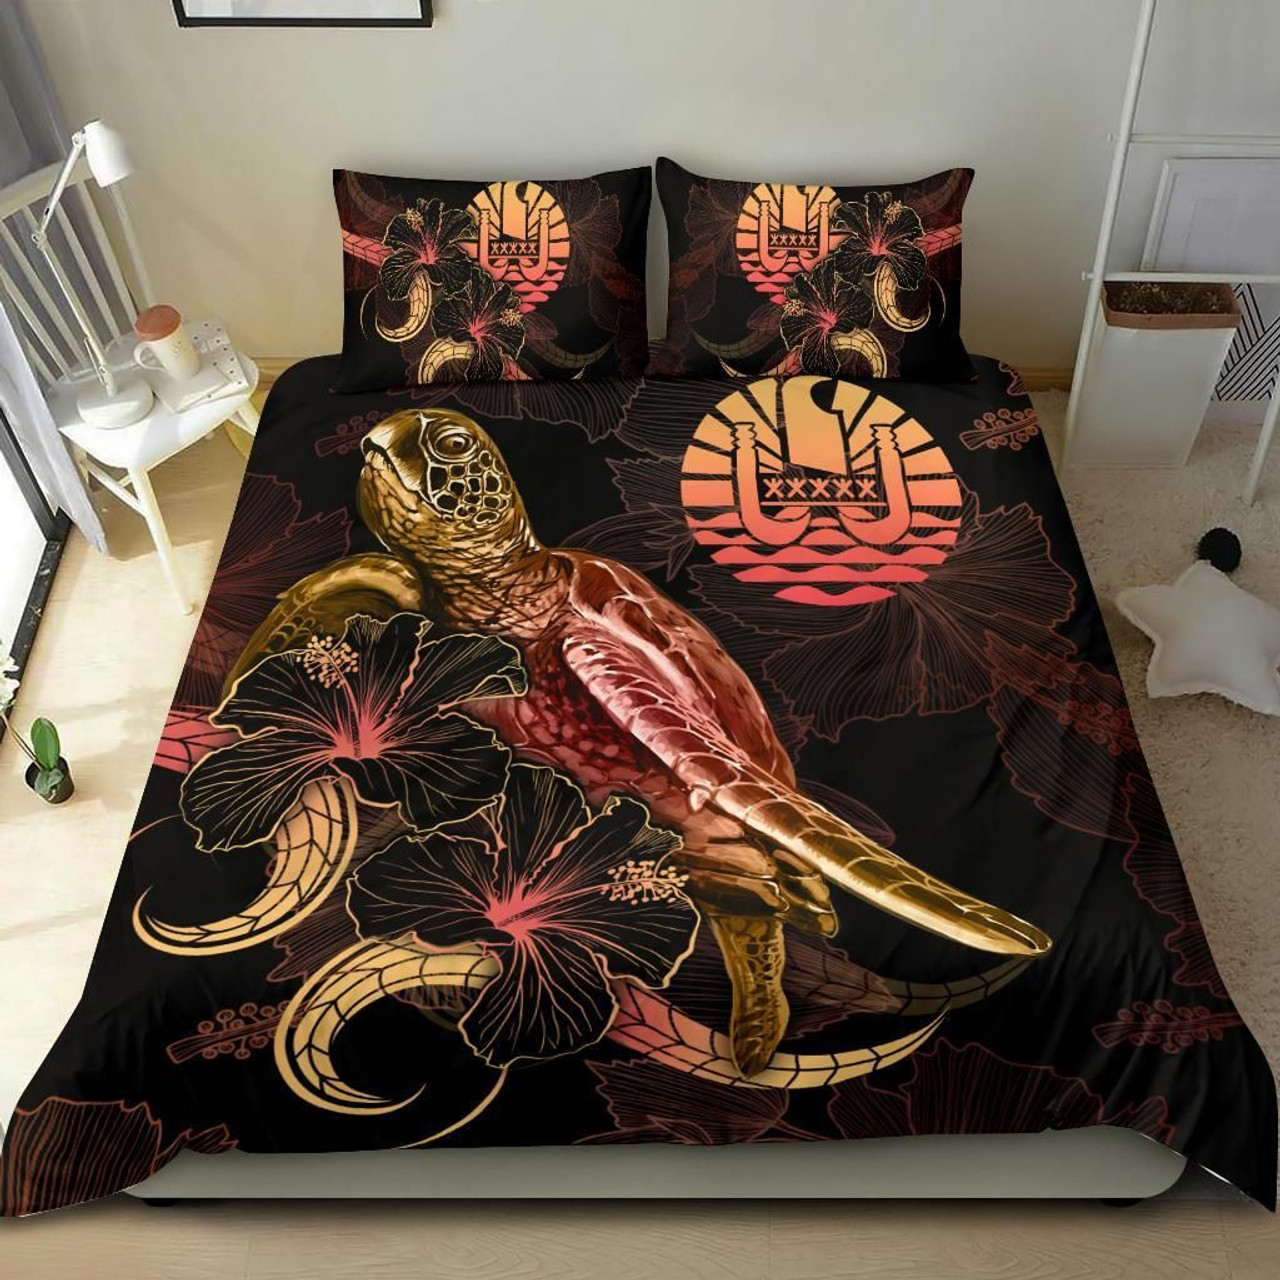 Tahiti Polynesian Bedding Set - Turtle With Blooming Hibiscus Gold 2